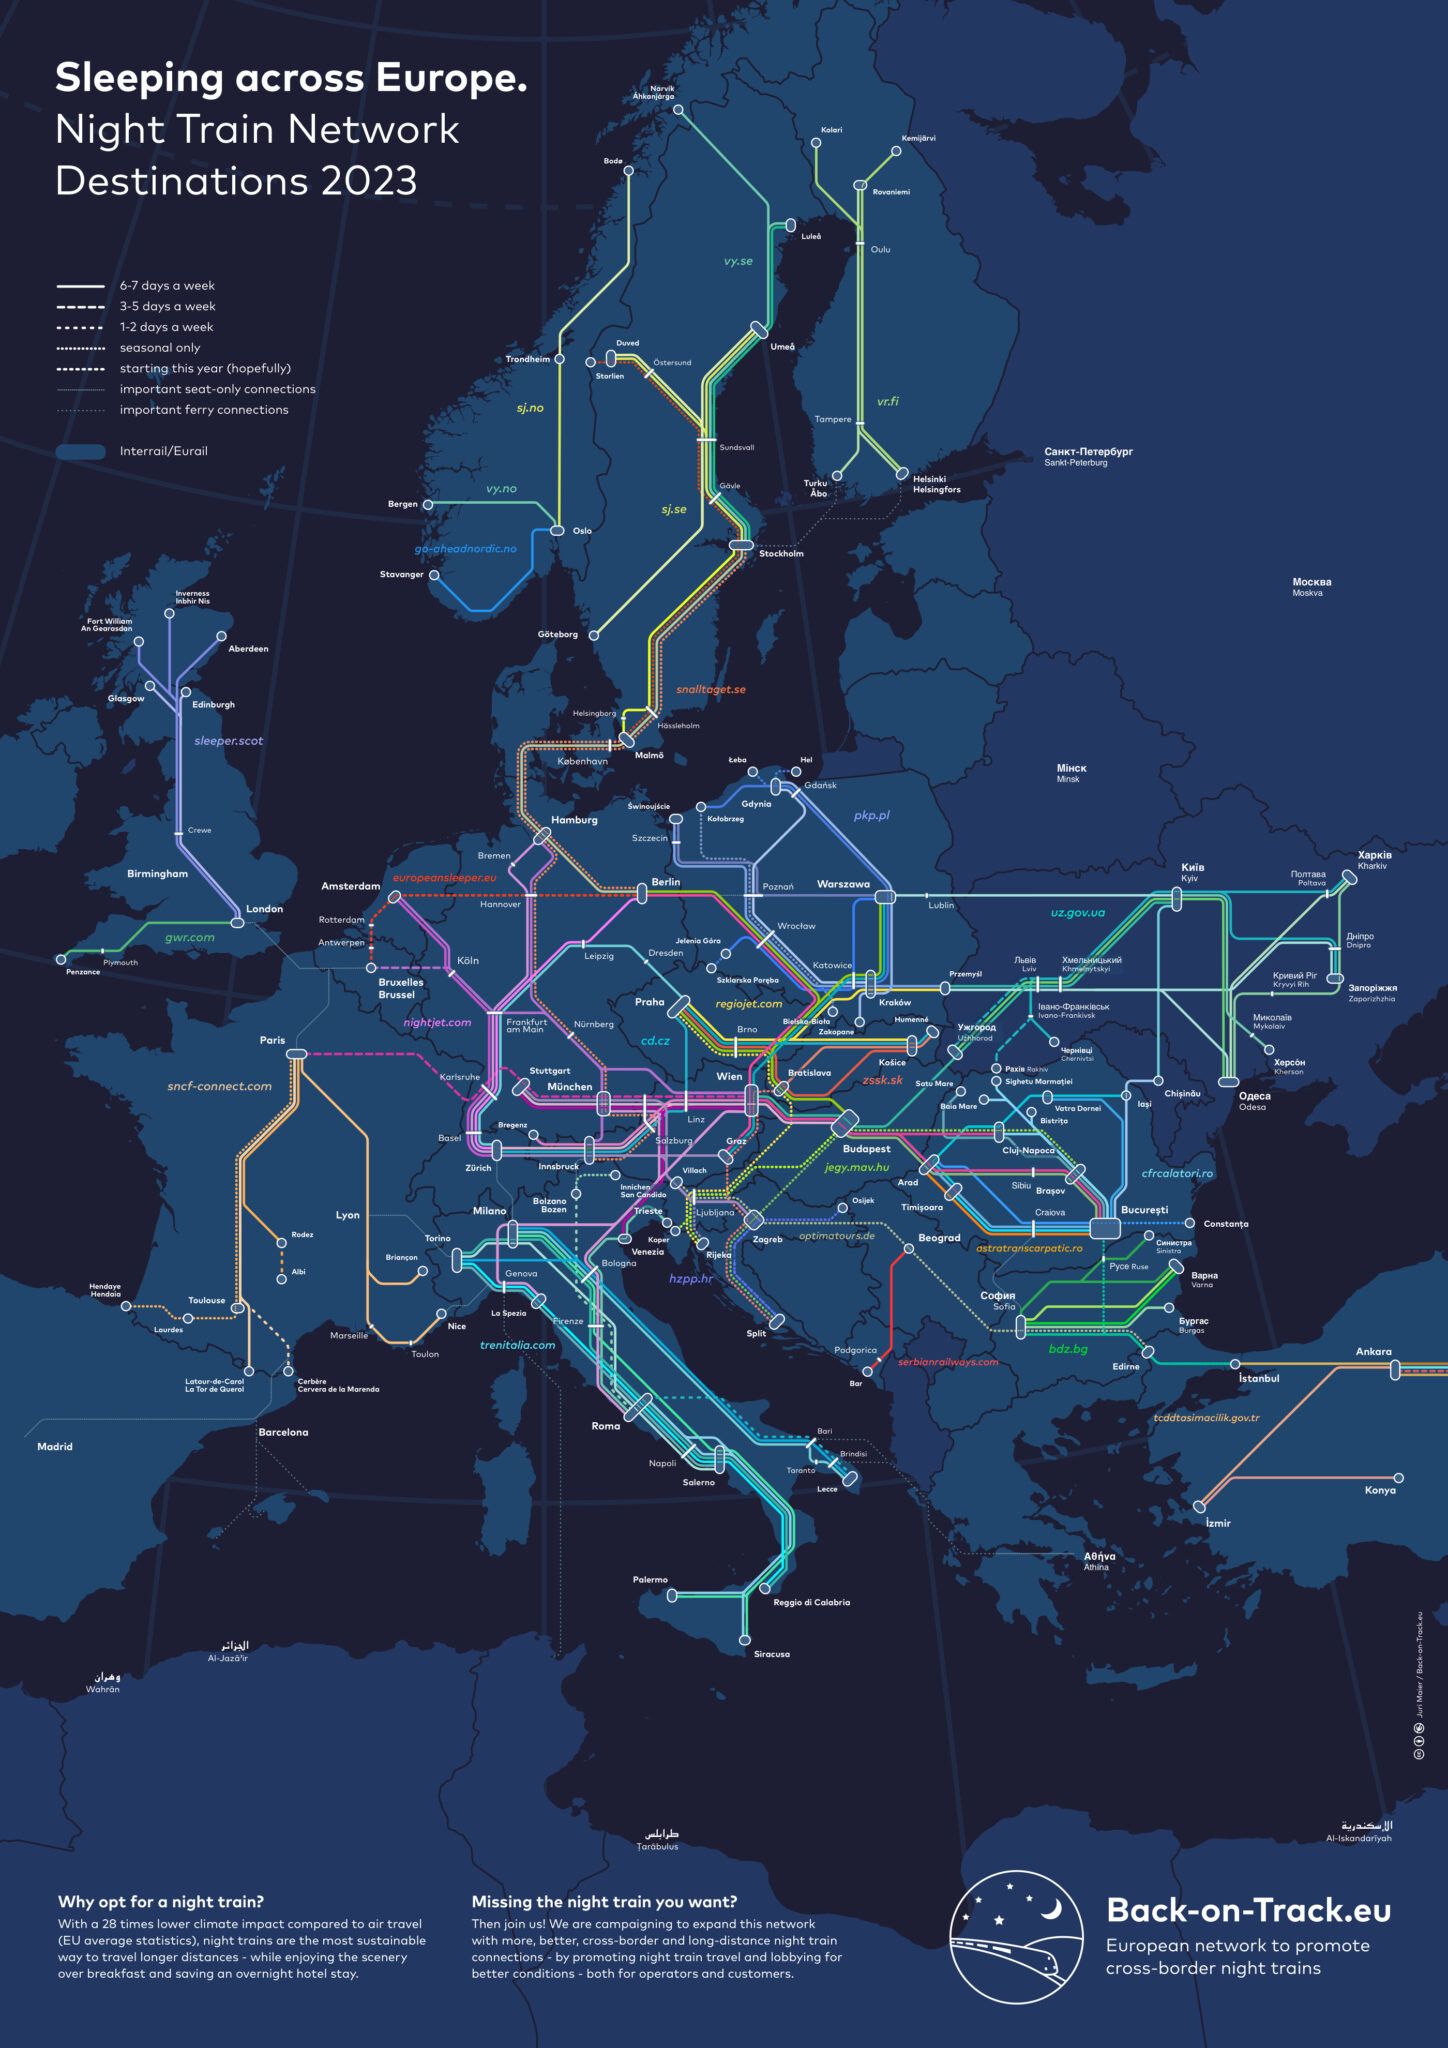 Click image for larger version  Name:	B-o-T-NightTrainMap-2023@4x-1448x2048.jpg Views:	0 Size:	316,7 kB ID:	2053219